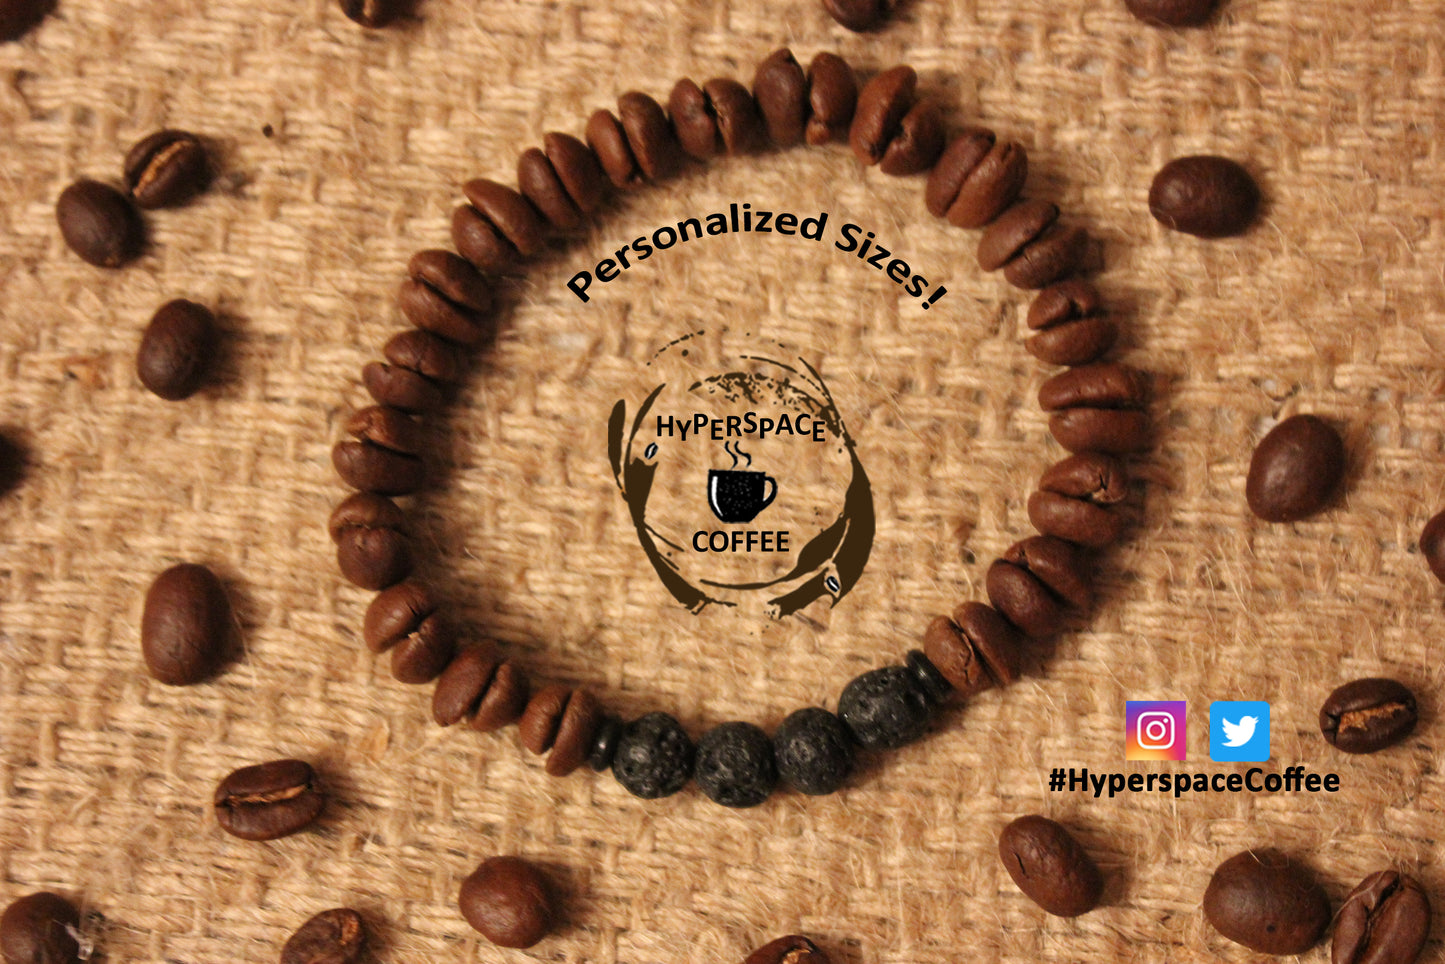 Coffee Bean Diffusion Bracelet - Real Coffee Beads & Lava Beads Diffuser Essential Oils Bracelet - Coffee Lover Gift - Essential Oils Gift